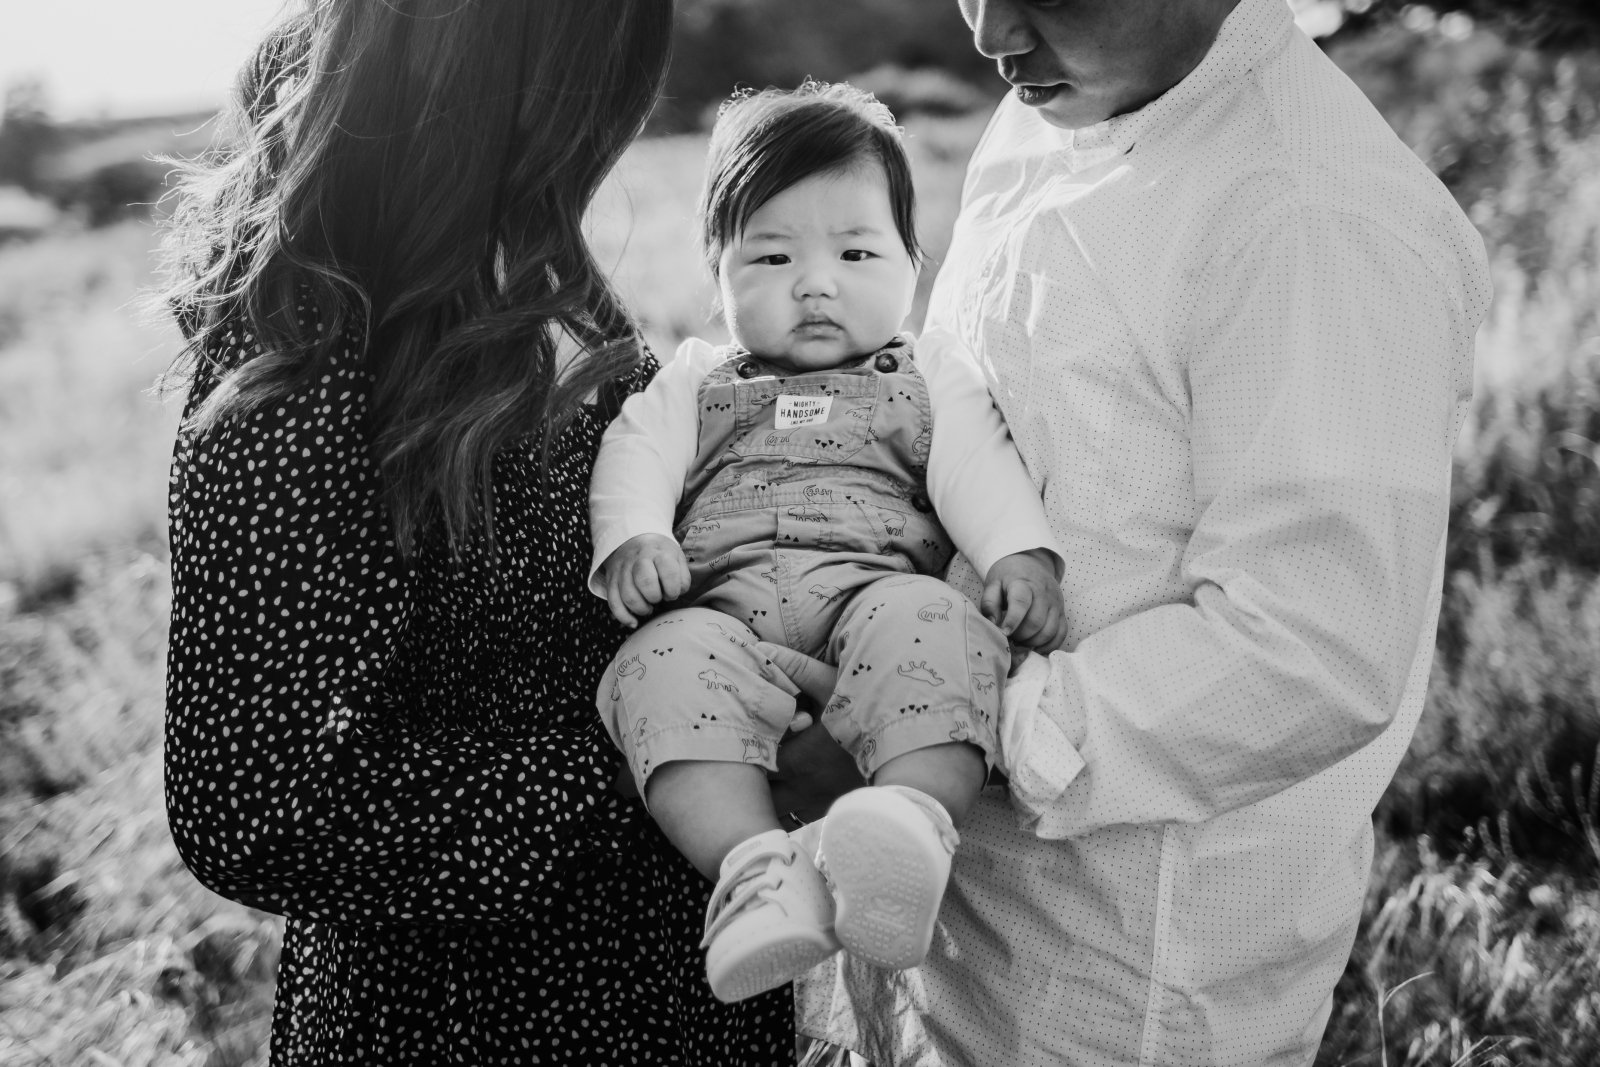 EAST BAY AREA FAMILY PHOTOGRAPHY SHELL RIDGE OPEN SPACE BABY LIFESTYLE PHOTOSHOOT  33.jpg